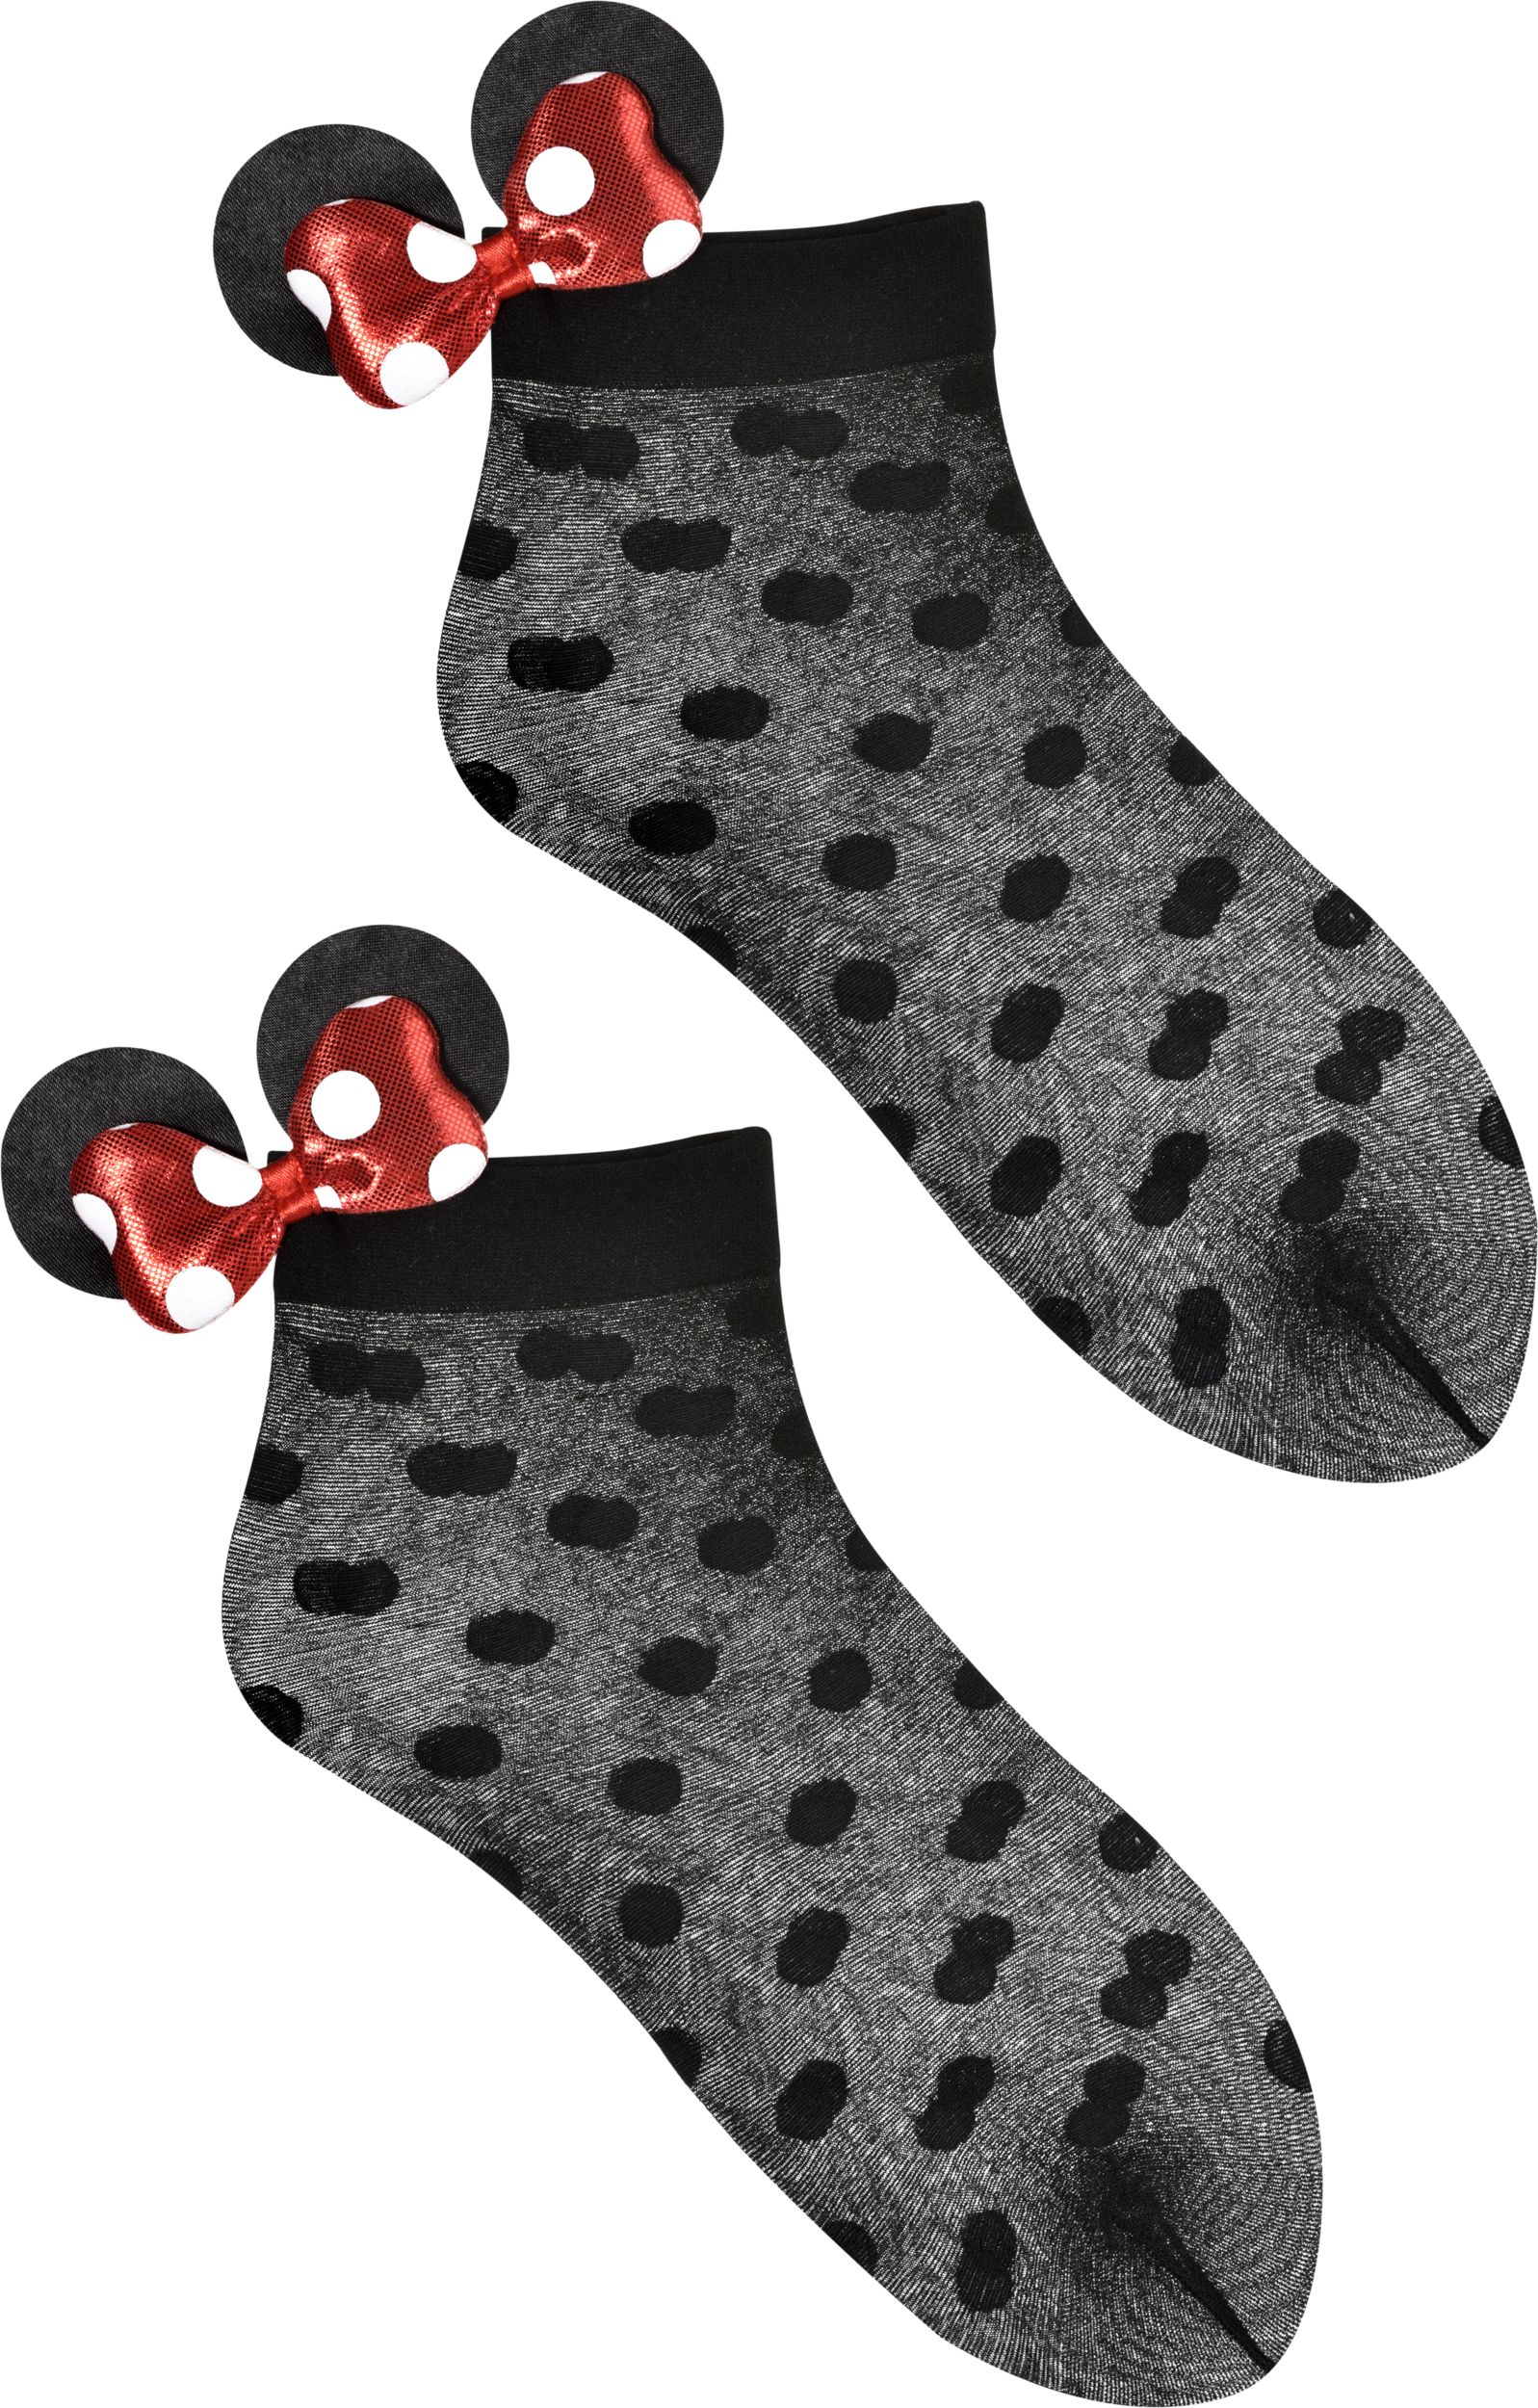 Kids' Minnie Mouse Party Socks